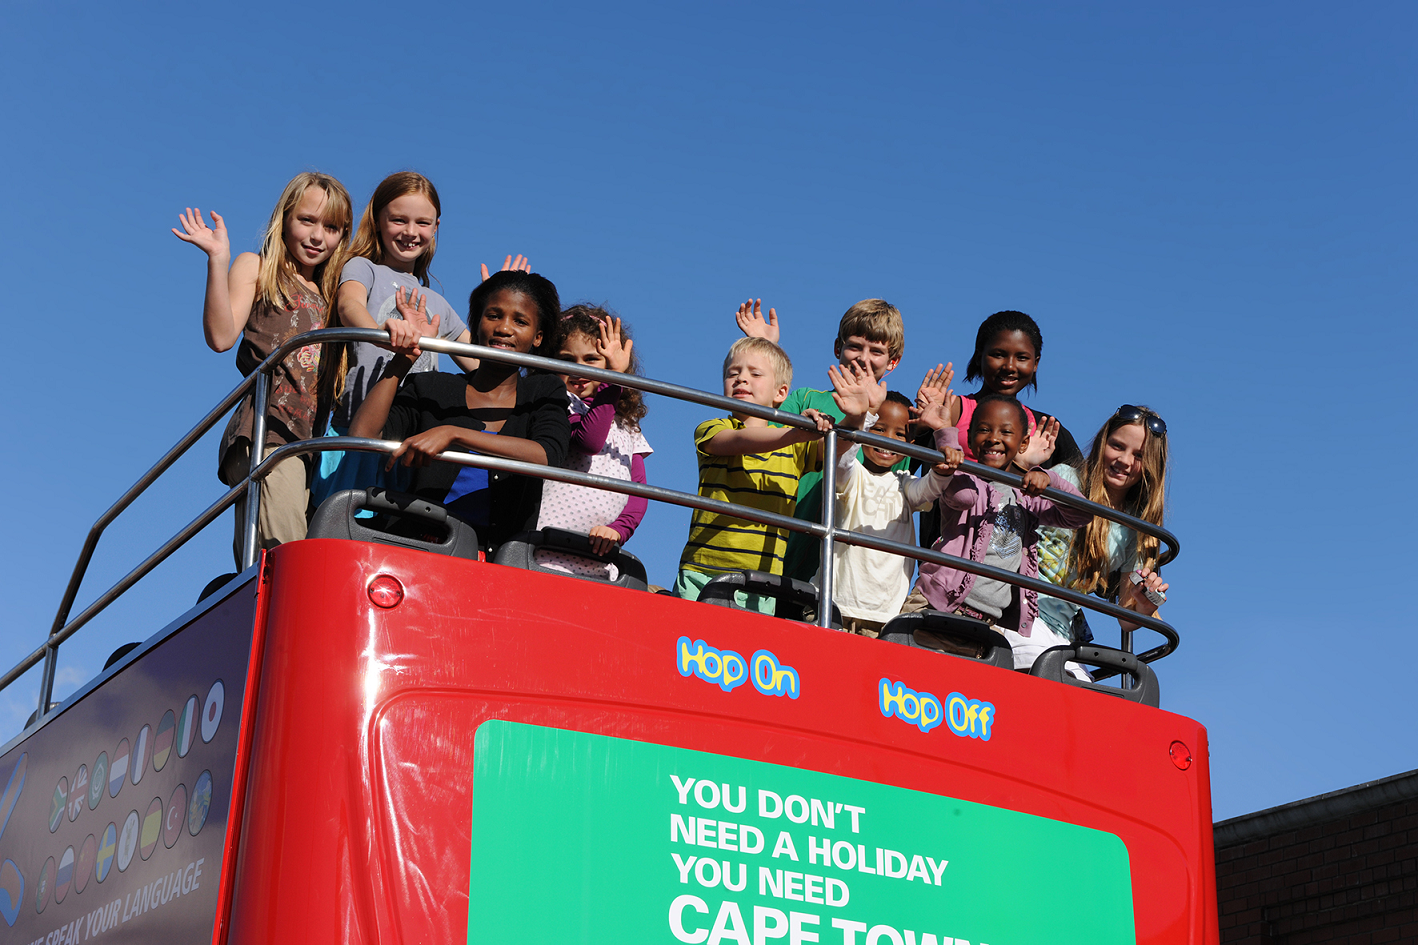 City Sightseeing family activity, kids free offer - Cape Town